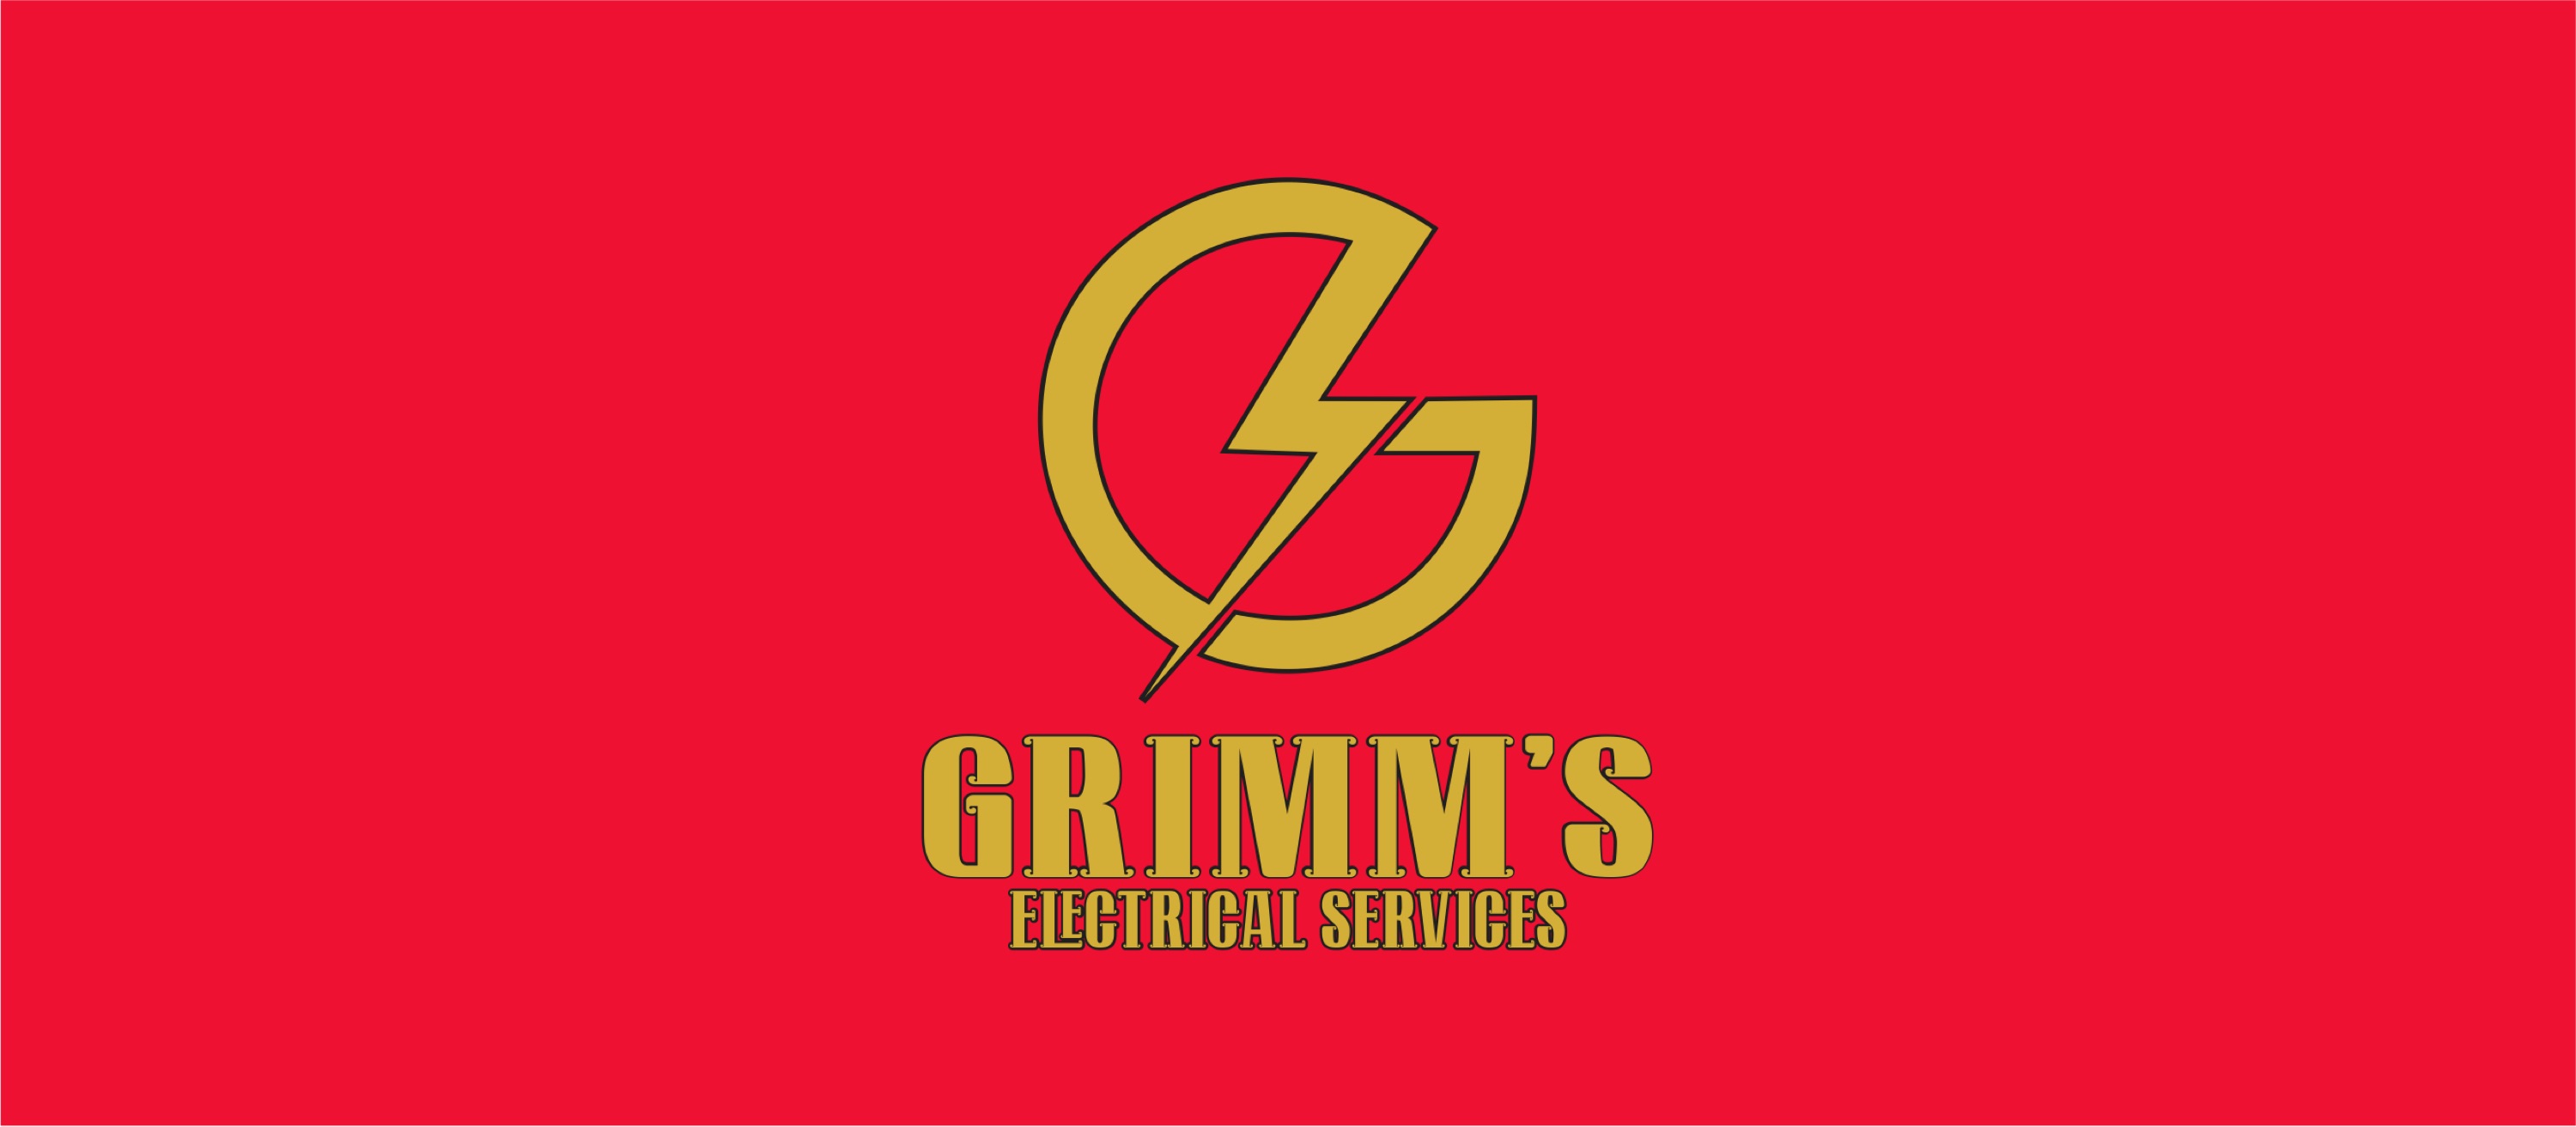 Grimm's Electrical Services Logo